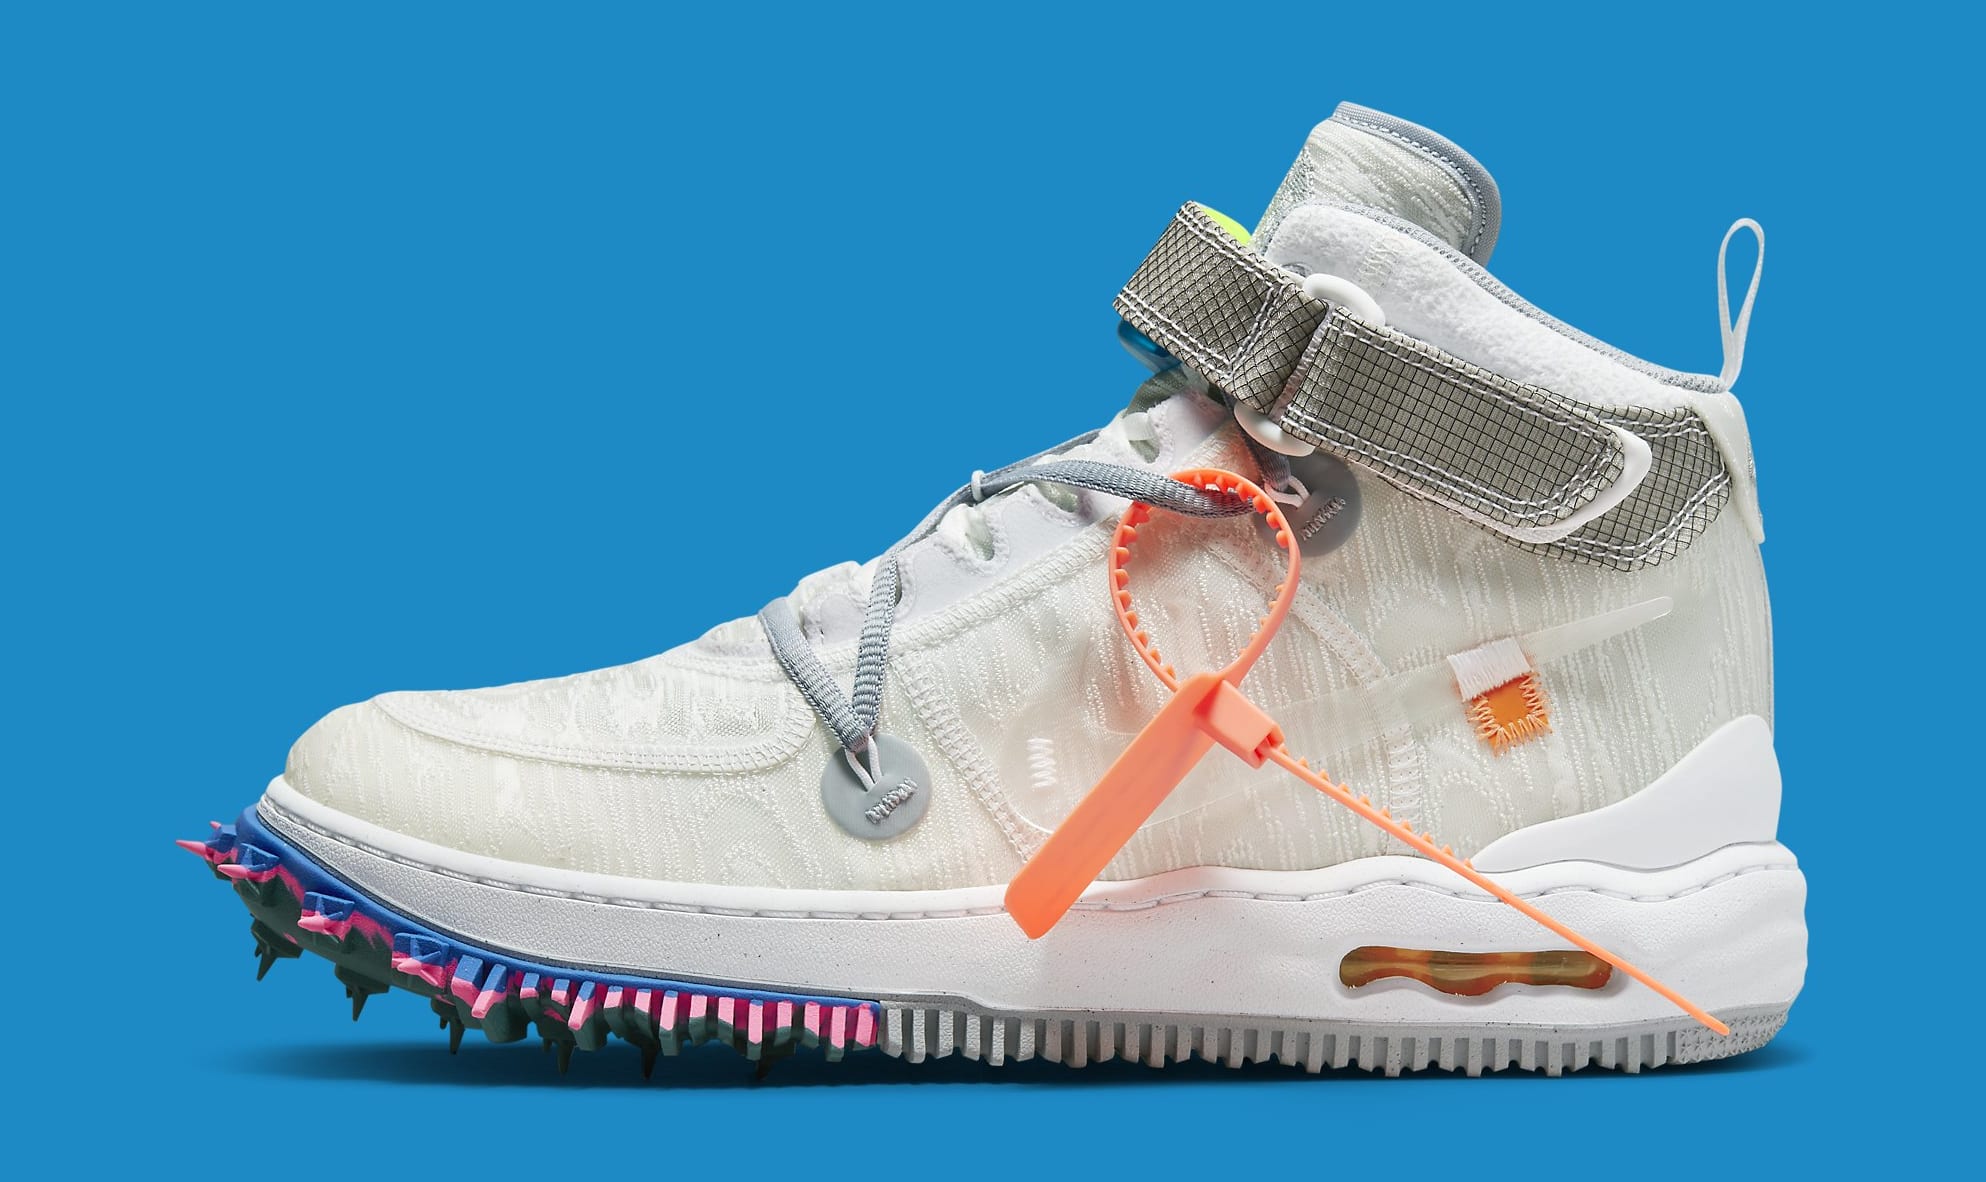 Graffiti' Off-White x Nike Air Force 1 Mids Are Available Now 